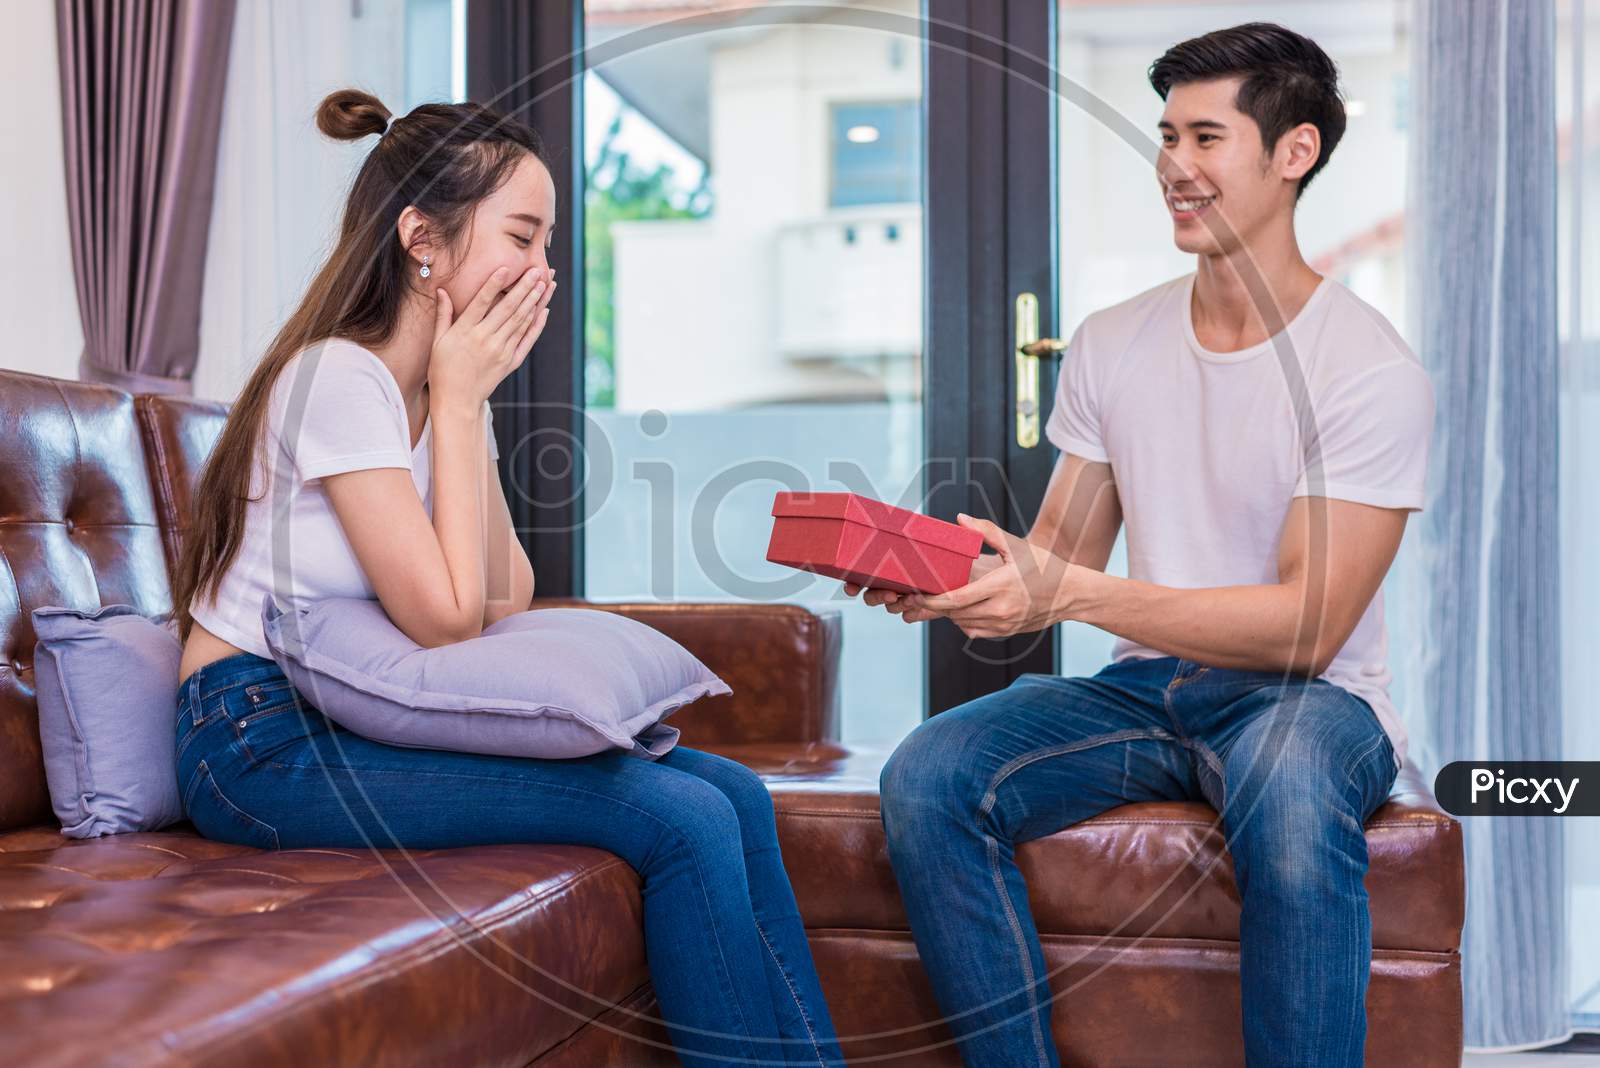 Boyfriend Surprising Girlfriend With Present. Woman Surprised When Looking At Gift Box On Special Day. Lovers And Couples Concept. Honeymoon And Dating Theme. Happiness And Valentines Day Theme.